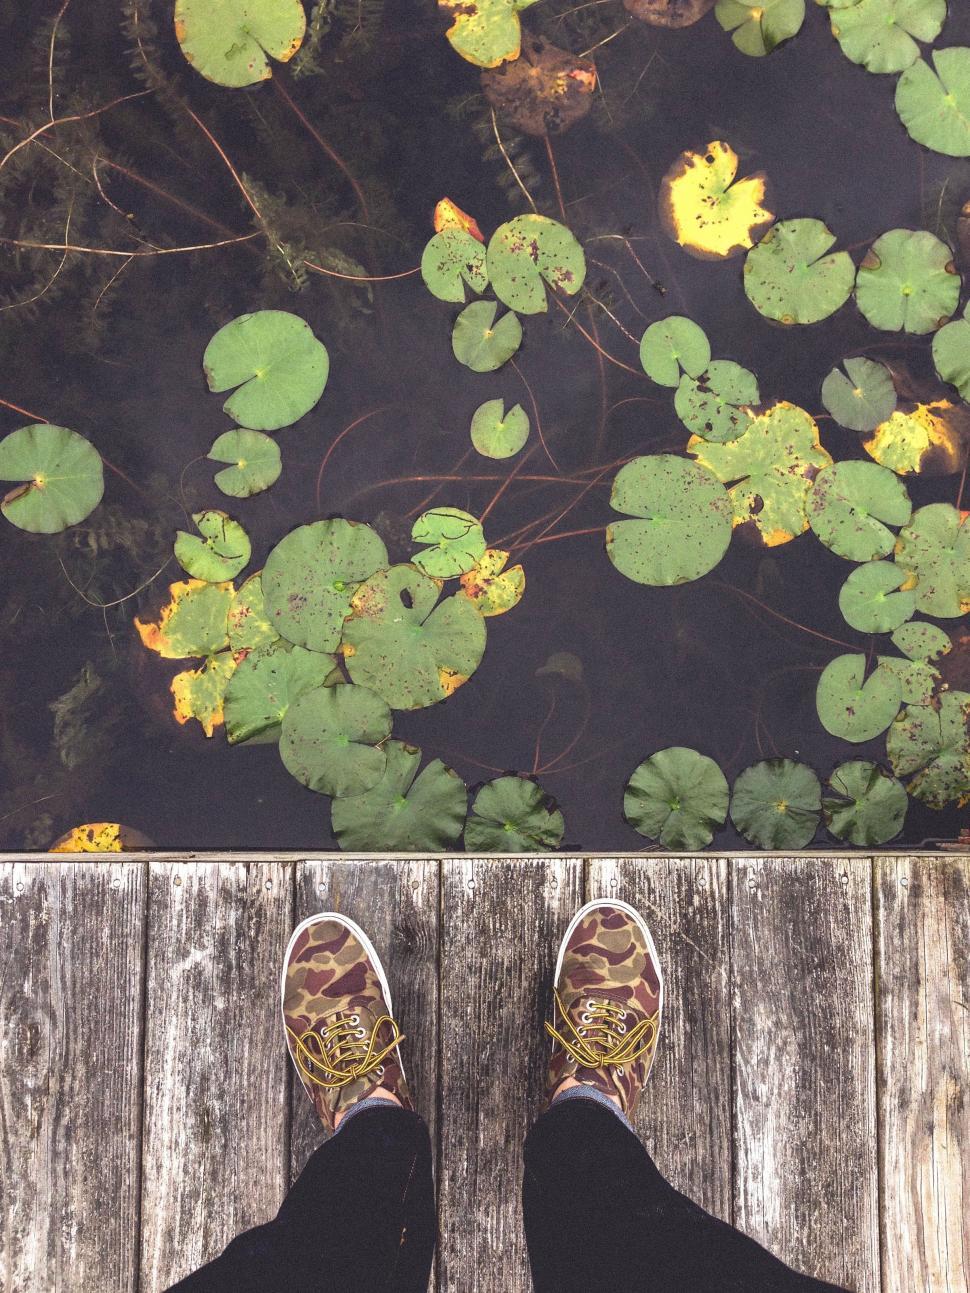 Free Image of Person Standing on Dock Next to Lily Pads 